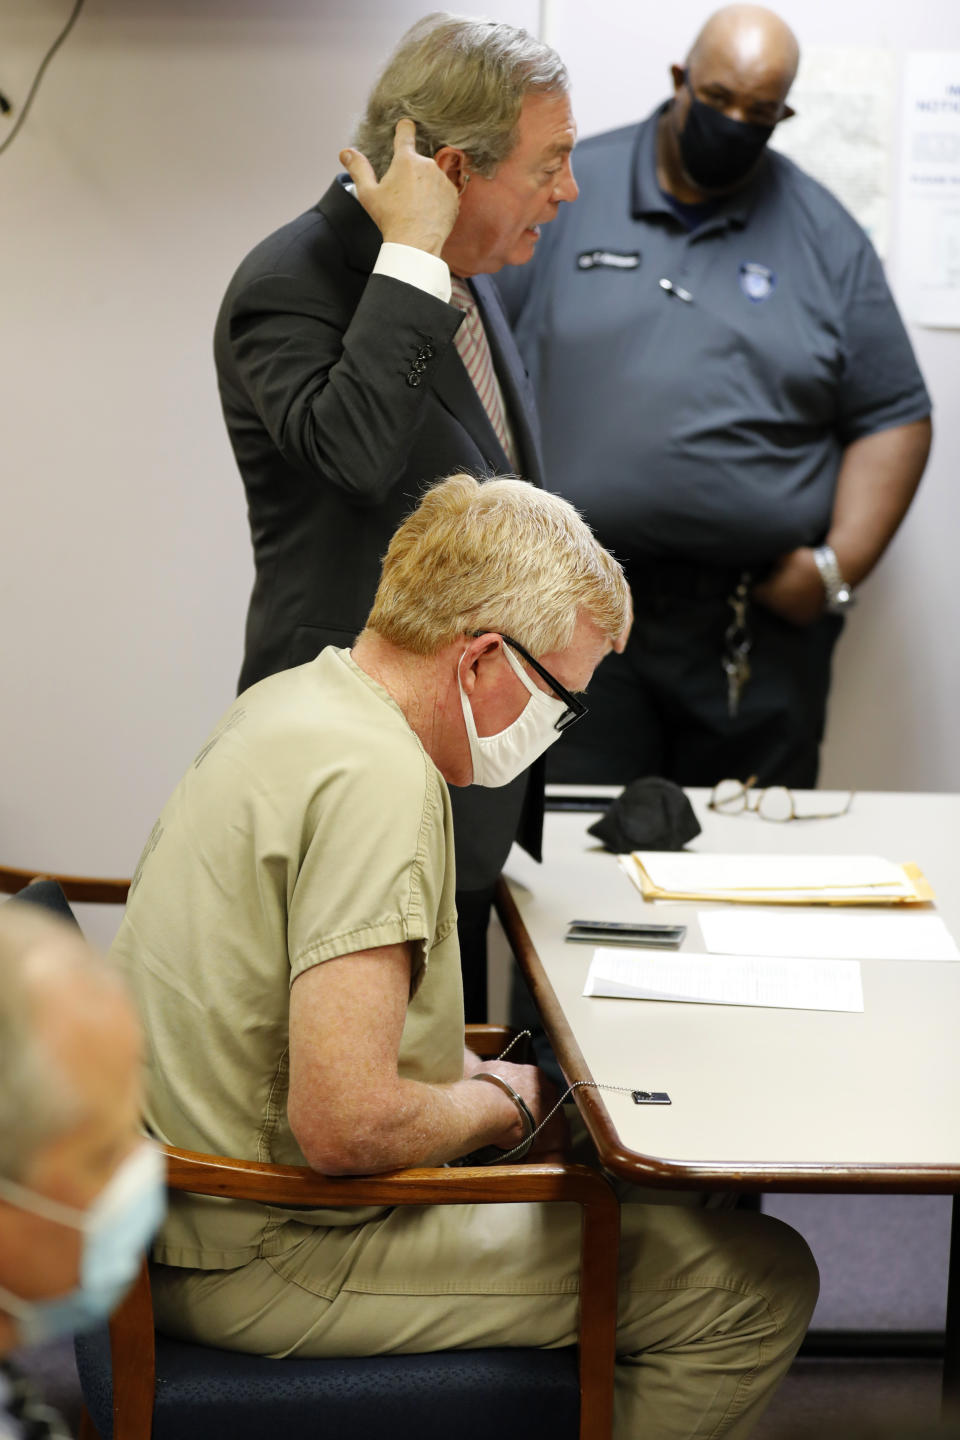 Alex Murdaugh's attorney Dick Harpootlian points to his head where Murdaugh, center, was shot in the head during Murdaugh's bond hearing, Thursday, Sept. 16, 2021, in Varnville, S.C. Murdaugh surrendered Thursday to face insurance fraud and other charges after state police said he arranged to have himself shot in the head so that his son would get a $10 million life insurance payout. (AP Photo/Mic Smith)